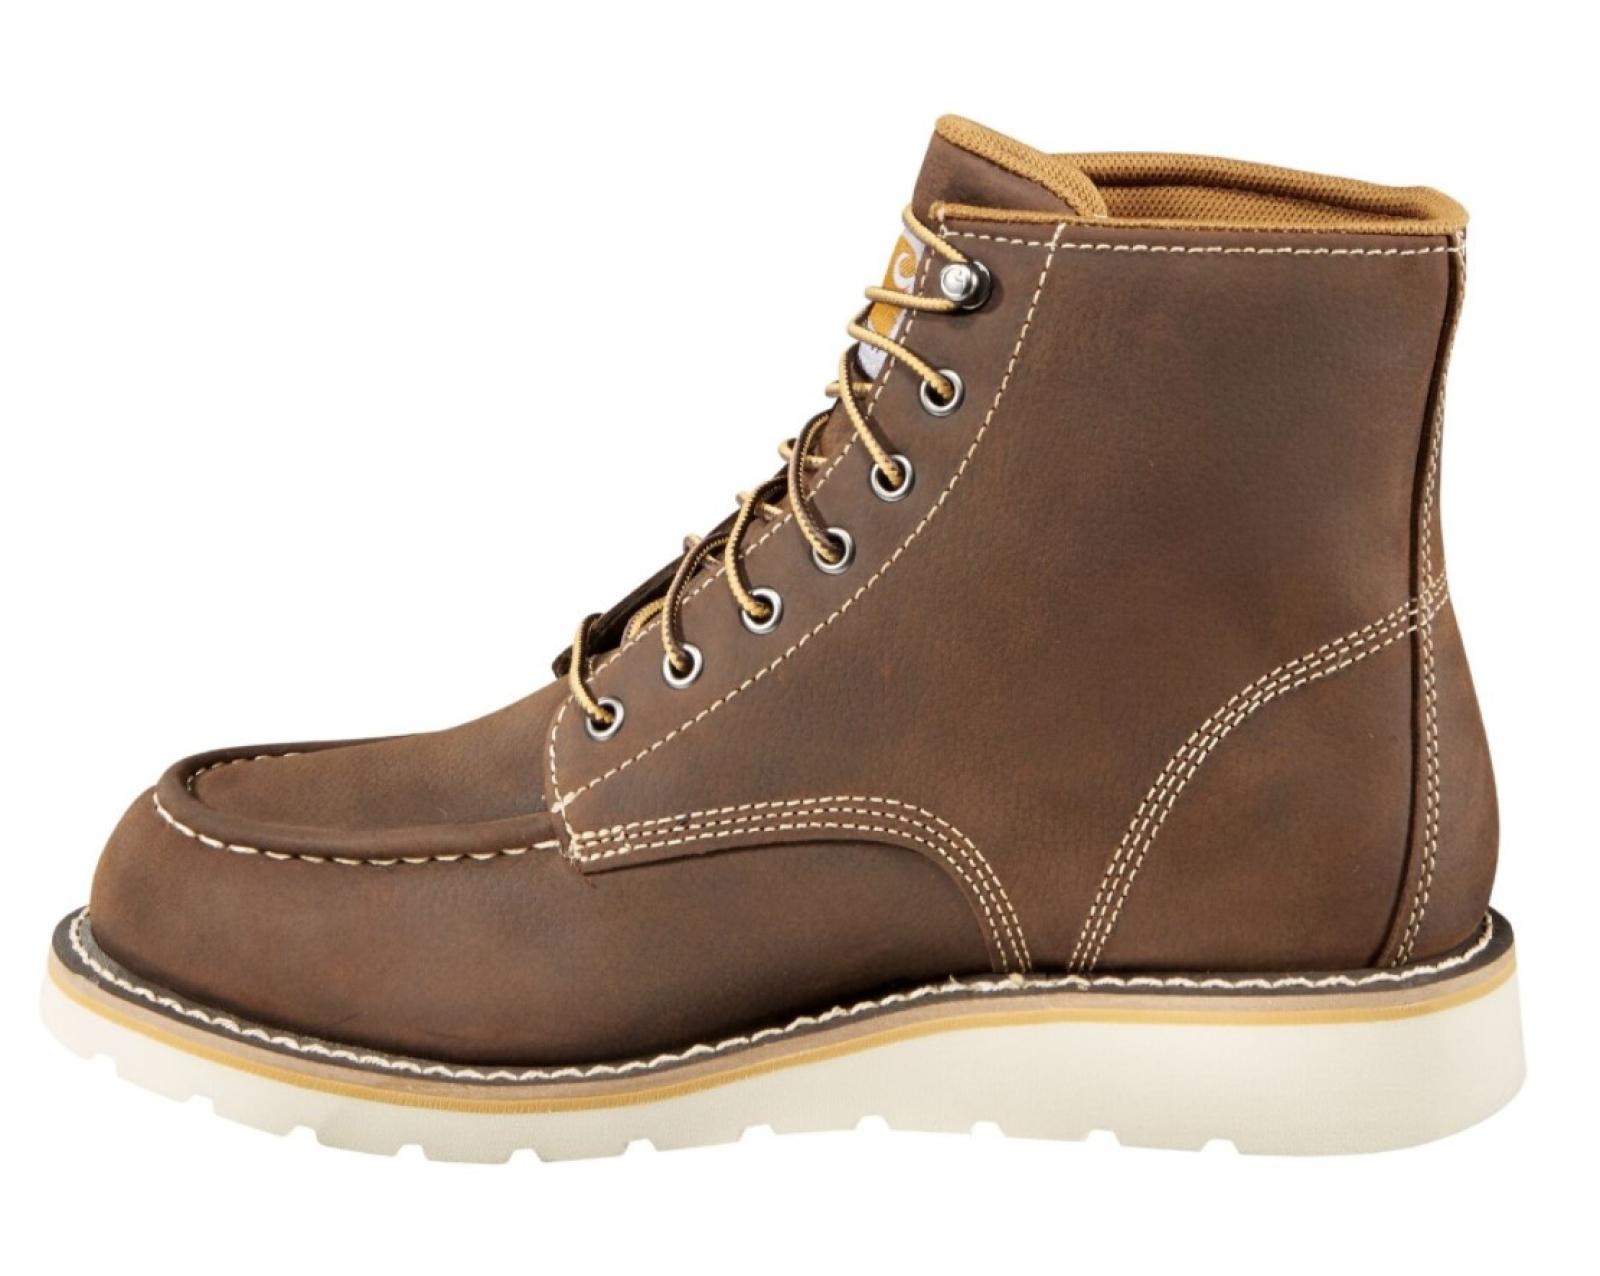 Carhartt 6-Inch Non-Safety Toe Wedge Boot Profile View